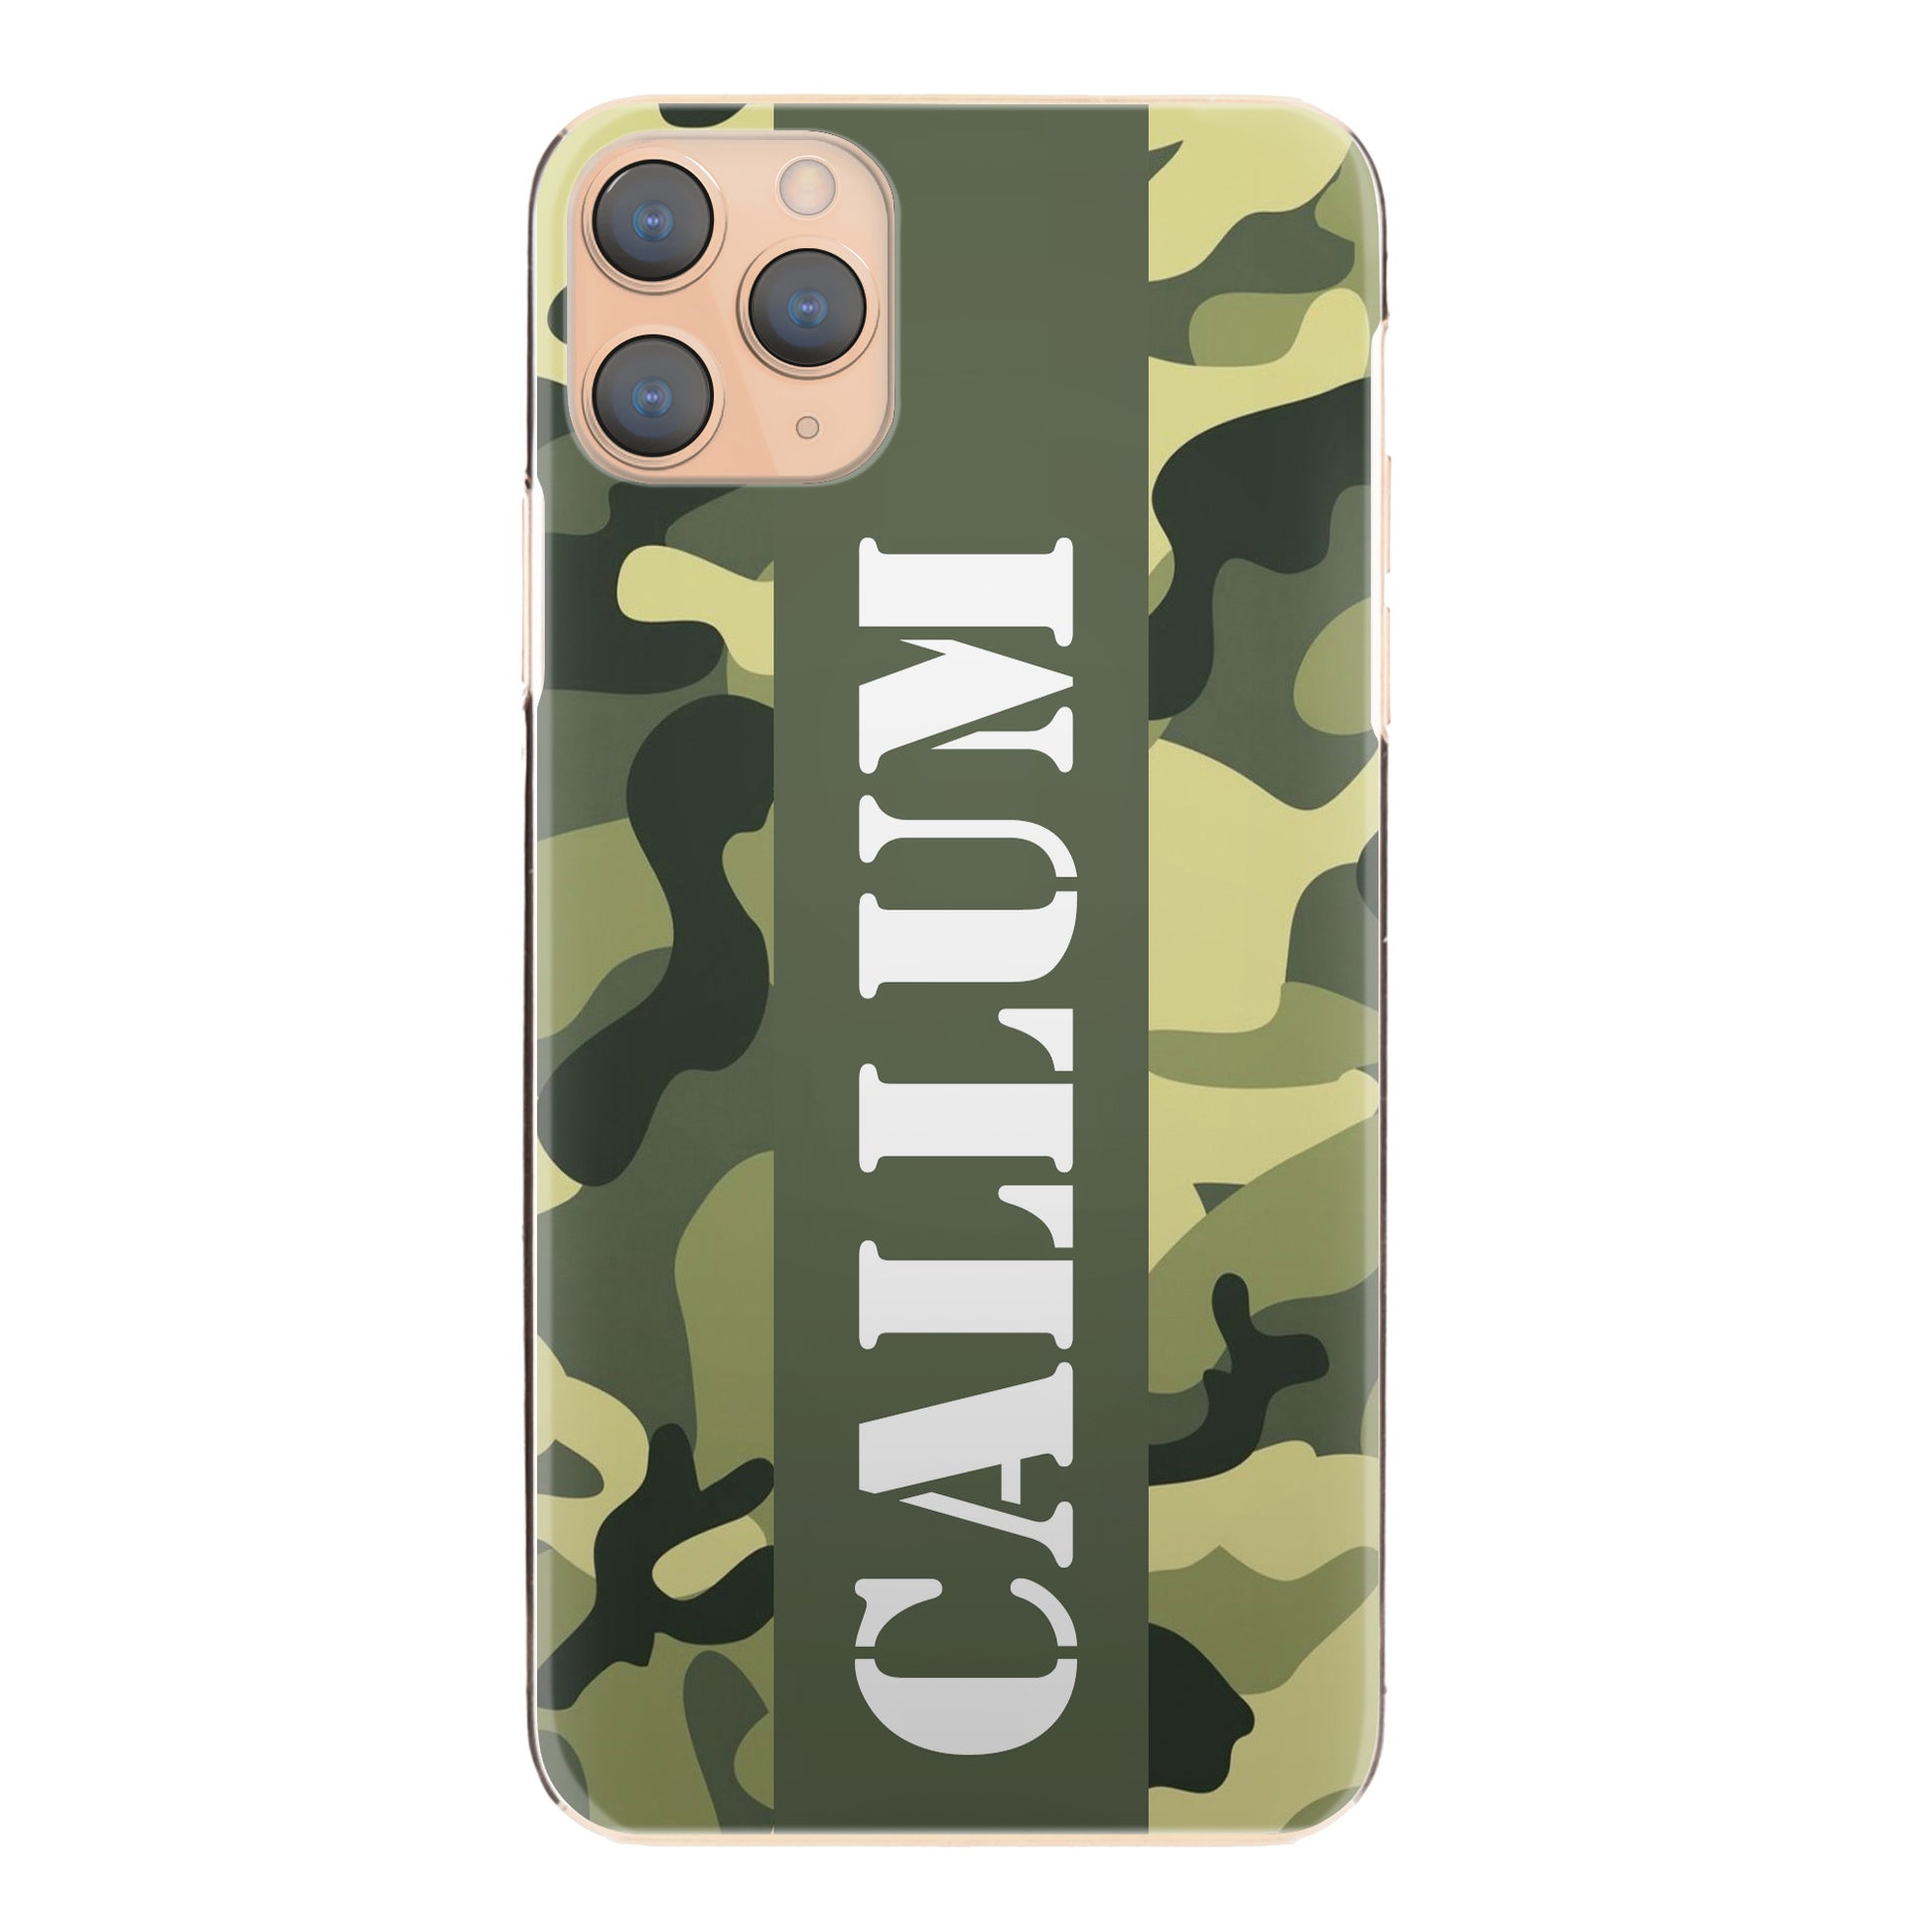 Personalised Xiaomi Phone Hard Case with Military Text on Classic Green Camo